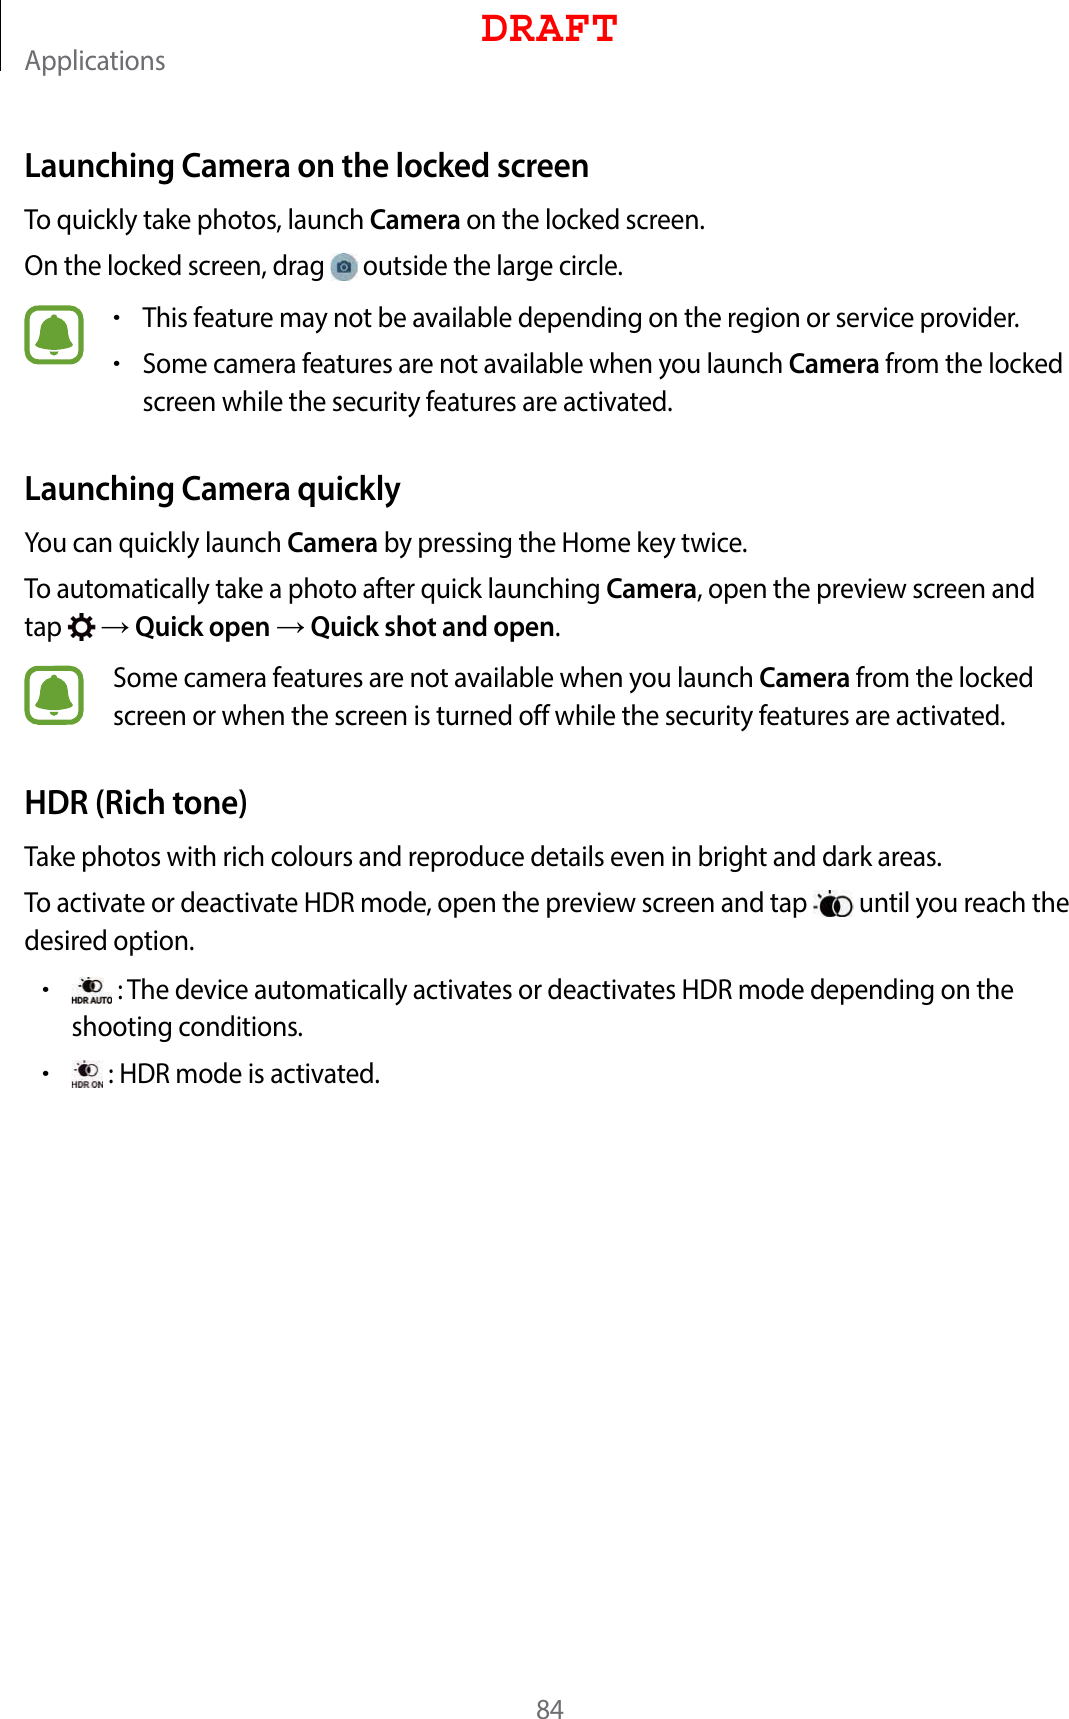 Applications84Launching Camera on the locked screenTo quickly take photos, launch Camera on the locked screen.On the locked screen, drag   outside the large circle.•This feature may not be available depending on the region or service provider.•Some camera features are not available when you launch Camera from the locked screen while the security features are activated.Launching Camera quicklyYou can quickly launch Camera by pressing the Home key twice.To automatically take a photo after quick launching Camera, open the preview screen and tap    Quick open  Quick shot and open.Some camera features are not available when you launch Camera from the locked screen or when the screen is turned off while the security features are activated.HDR (Rich tone)Take photos with rich colours and reproduce details even in bright and dark areas.To activate or deactivate HDR mode, open the preview screen and tap   until you reach the desired option.• : The device automatically activates or deactivates HDR mode depending on the shooting conditions.• : HDR mode is activated.DRAFT